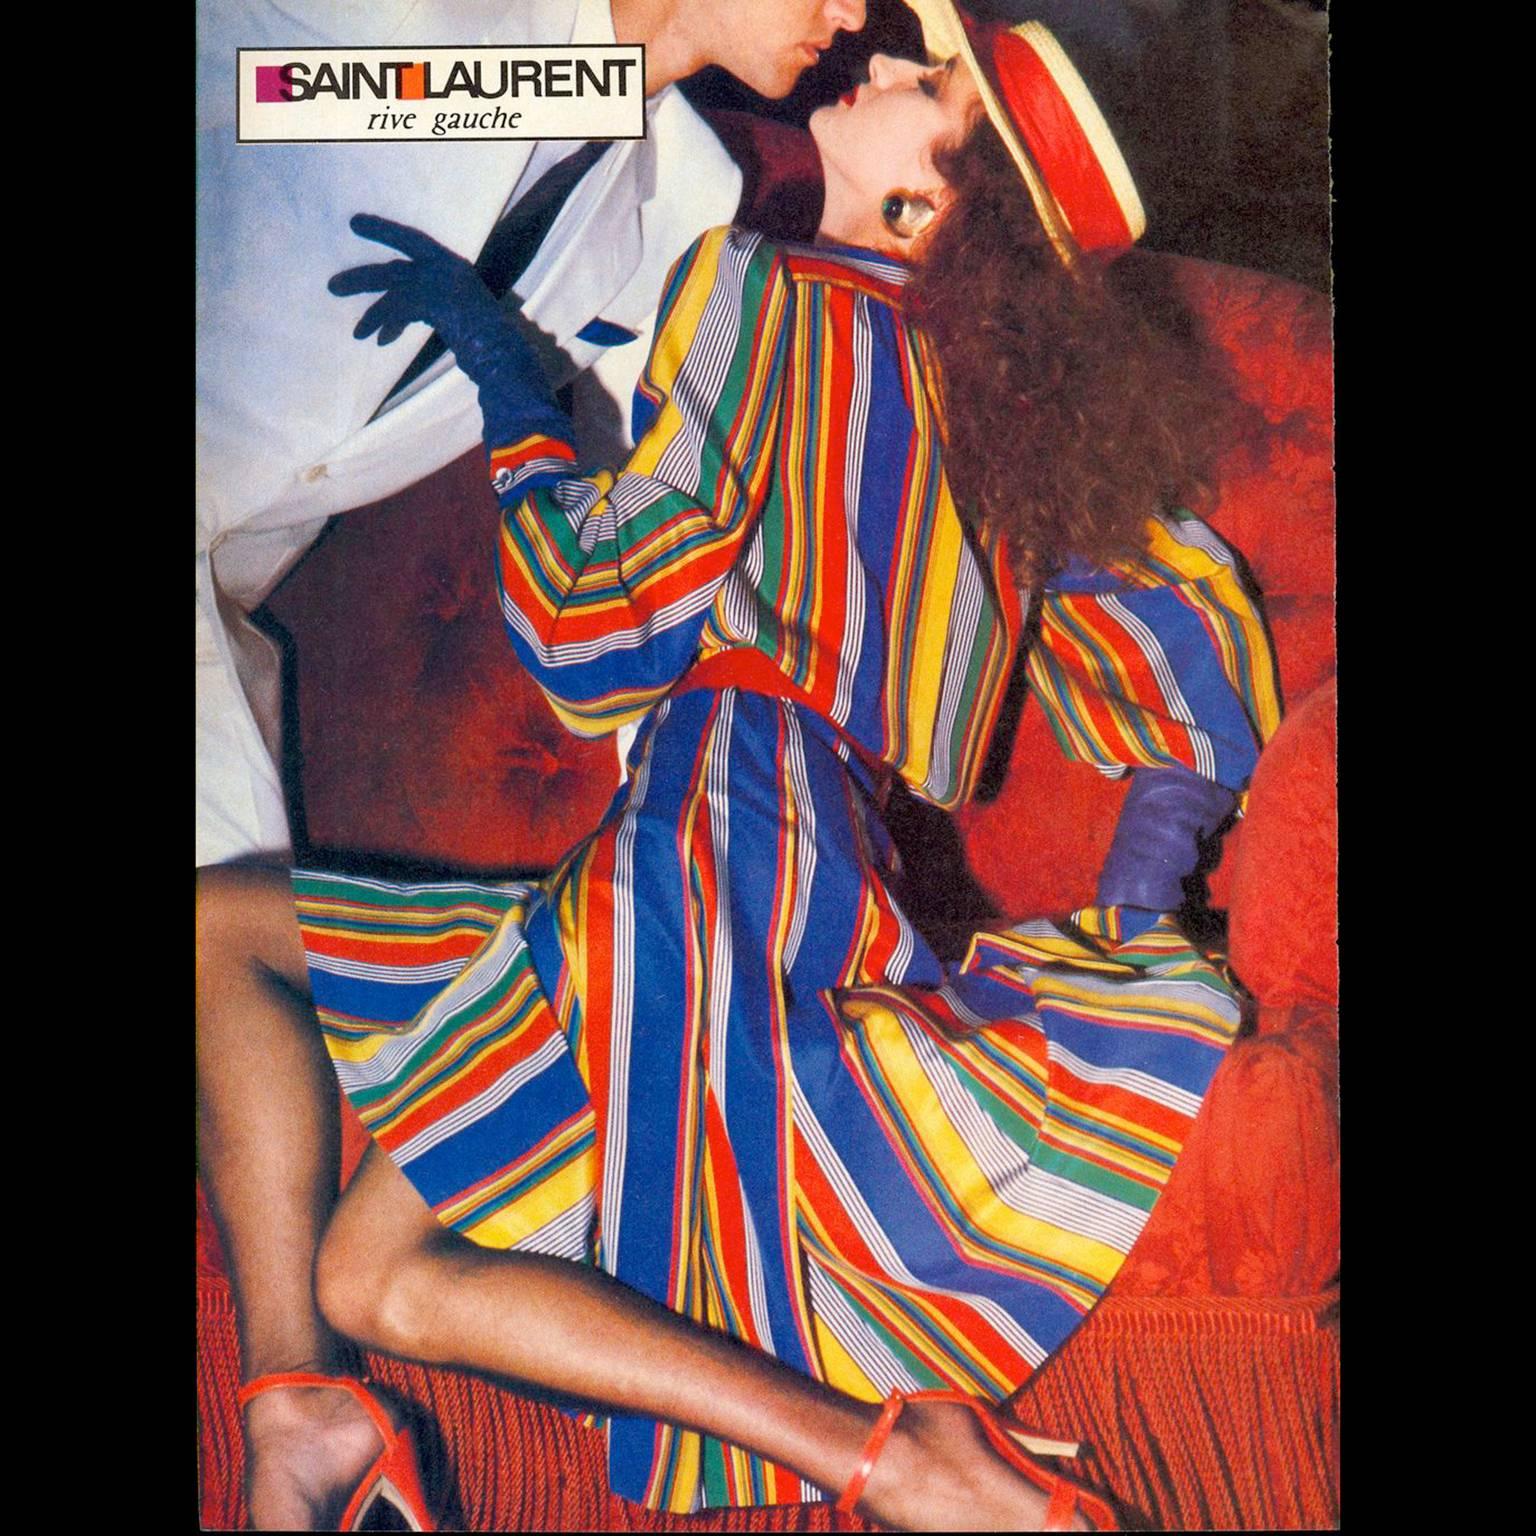 This beautiful silk, multi colored striped vintage dress was designed by Yves Saint Laurent in the 1980s. This great YSL dress has buttons up the front of the bodice, a side zipper, and attached sash at neck.  The dress is labeled a size 36 and has